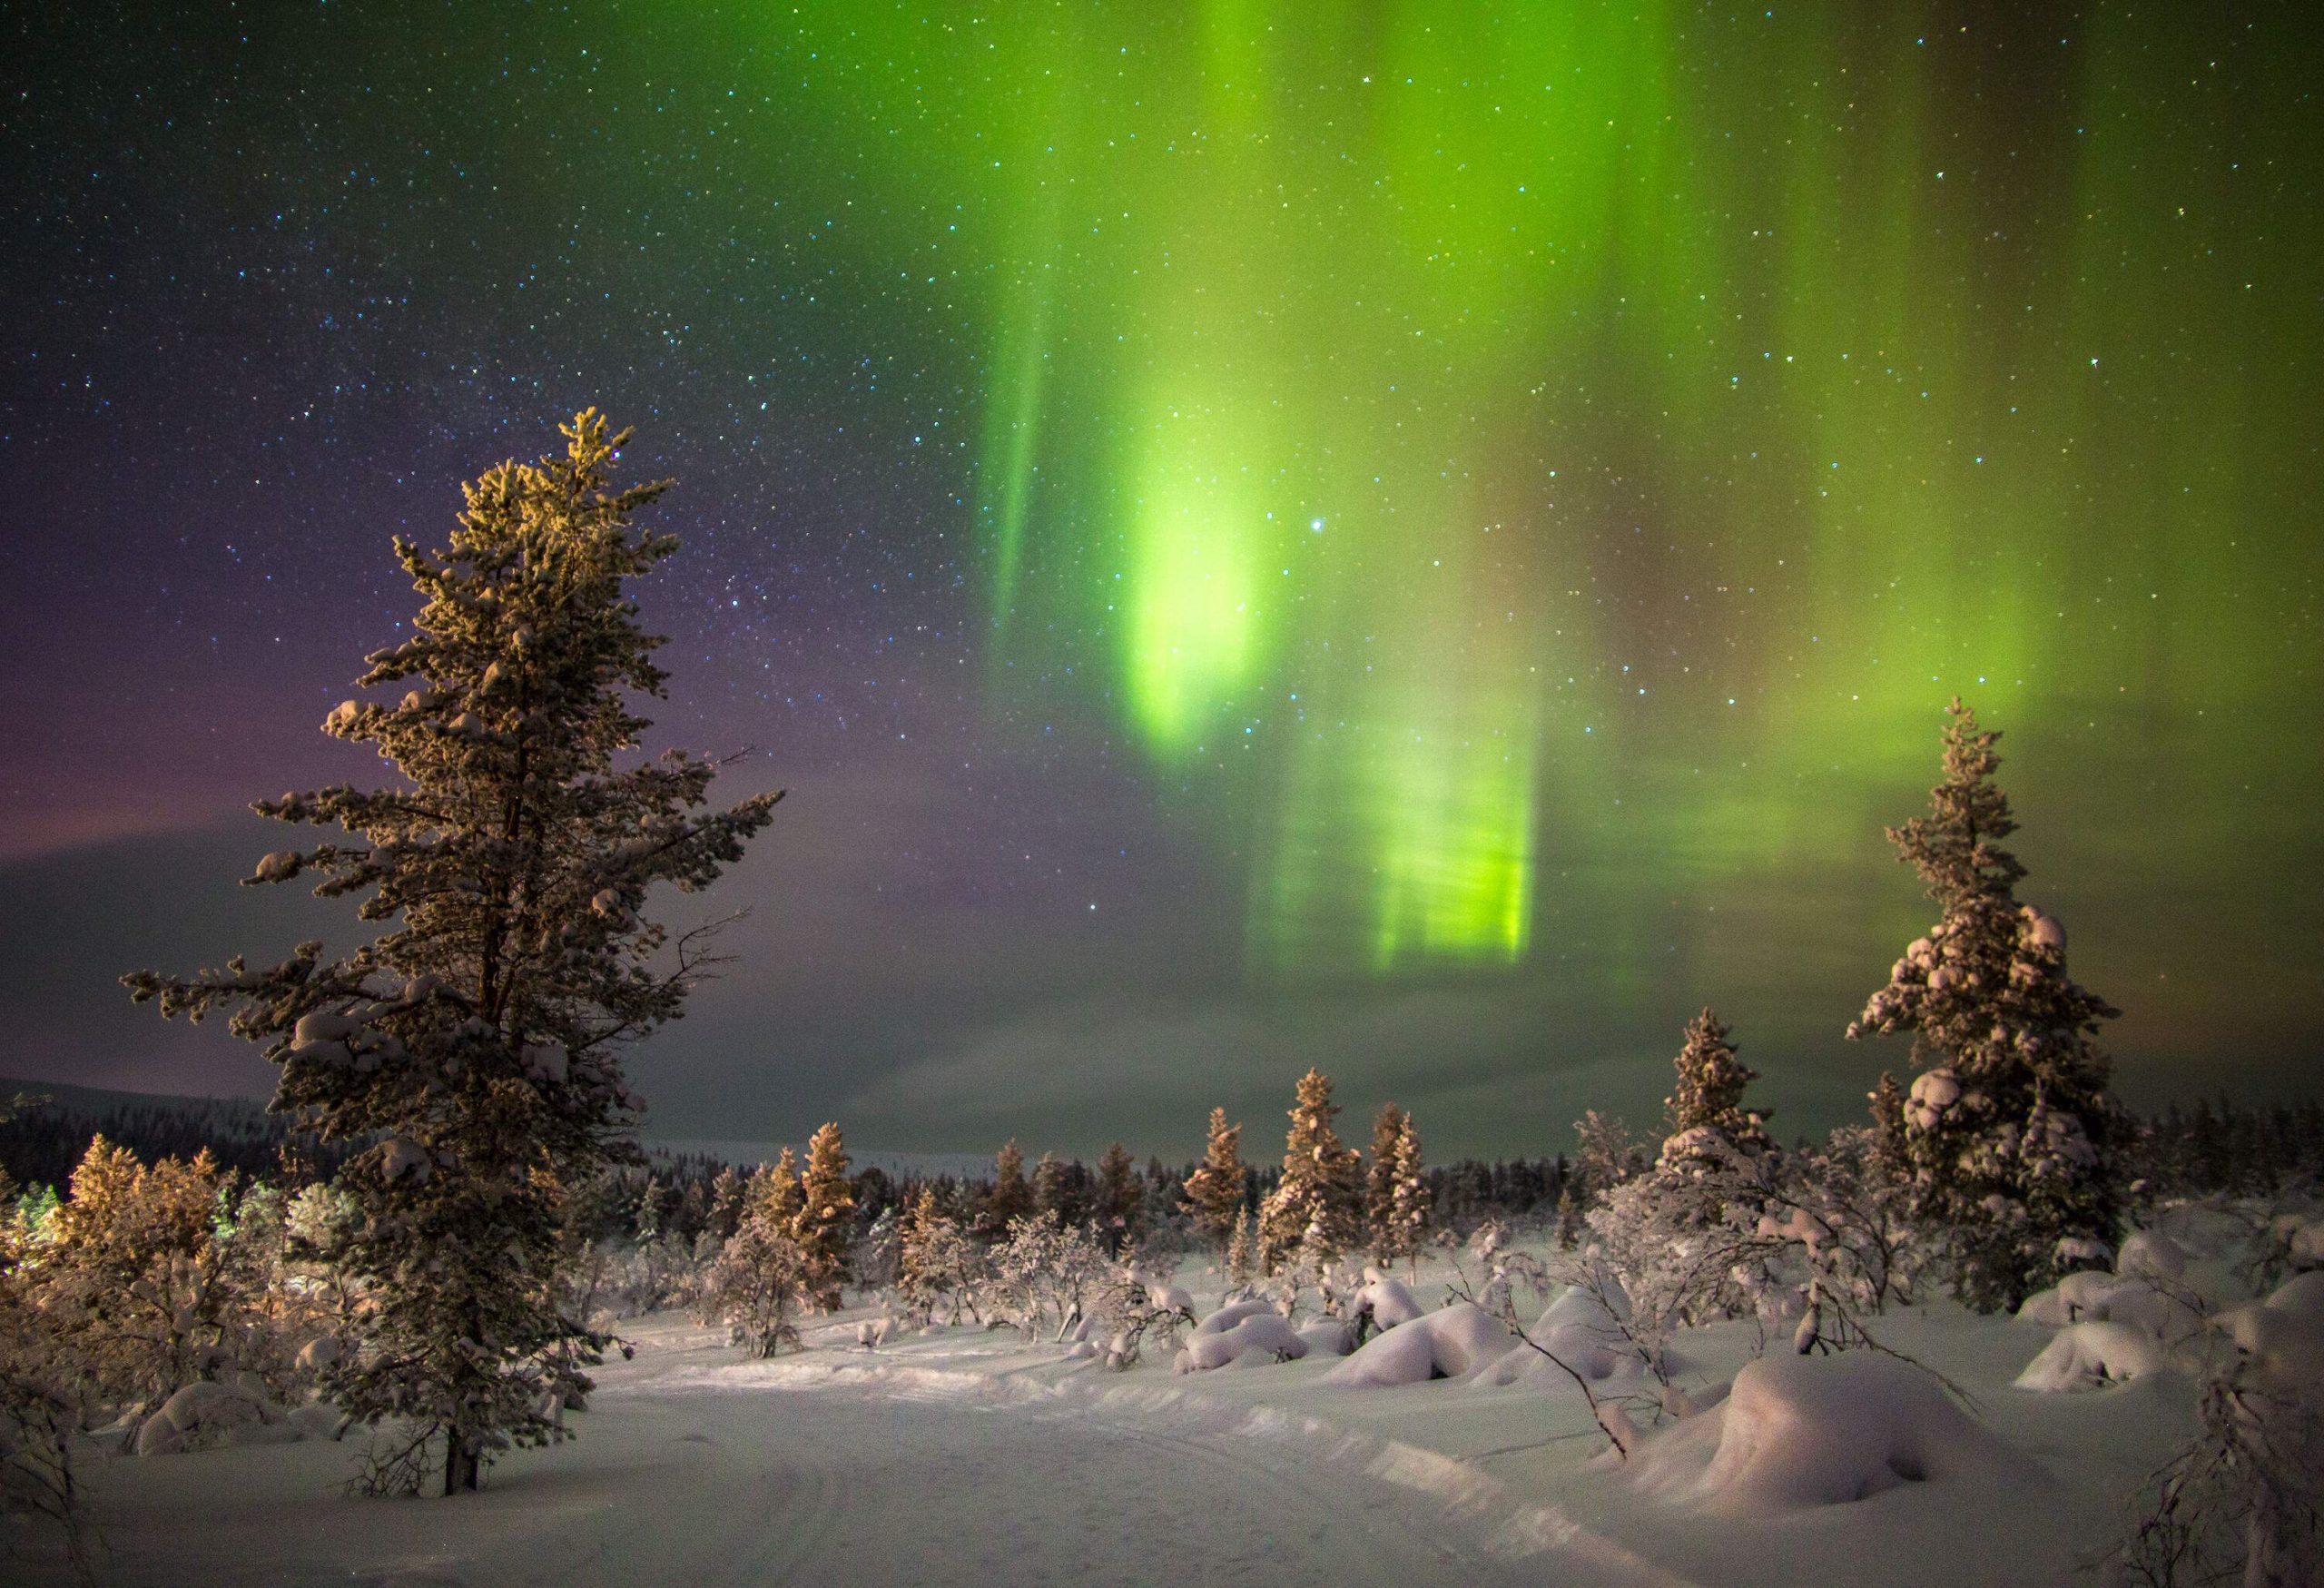 A land of powder snow surrounded by tall frost-covered trees under a green Northern Lights and starry sky.